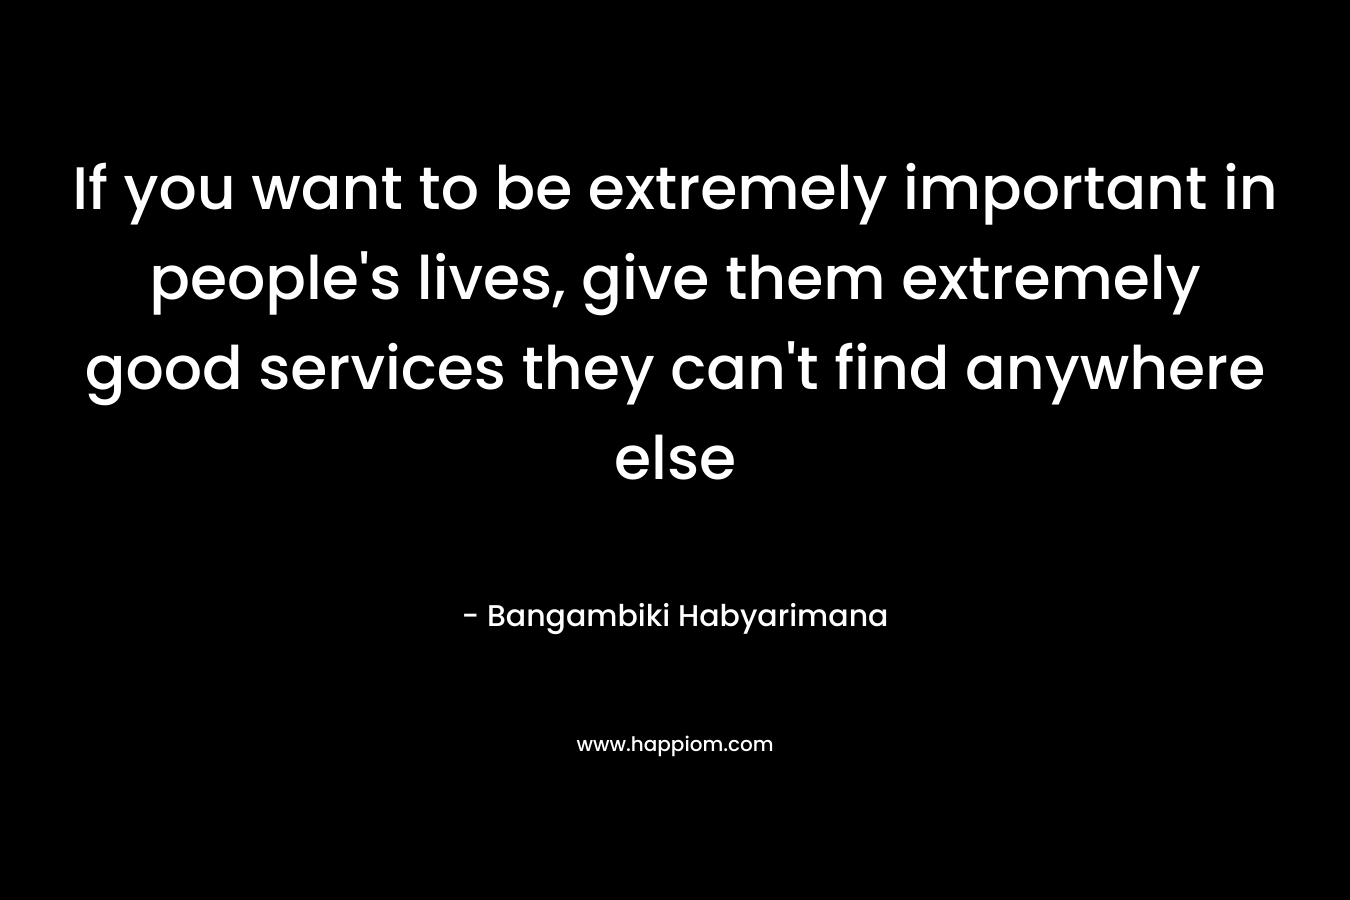 If you want to be extremely important in people's lives, give them extremely good services they can't find anywhere else